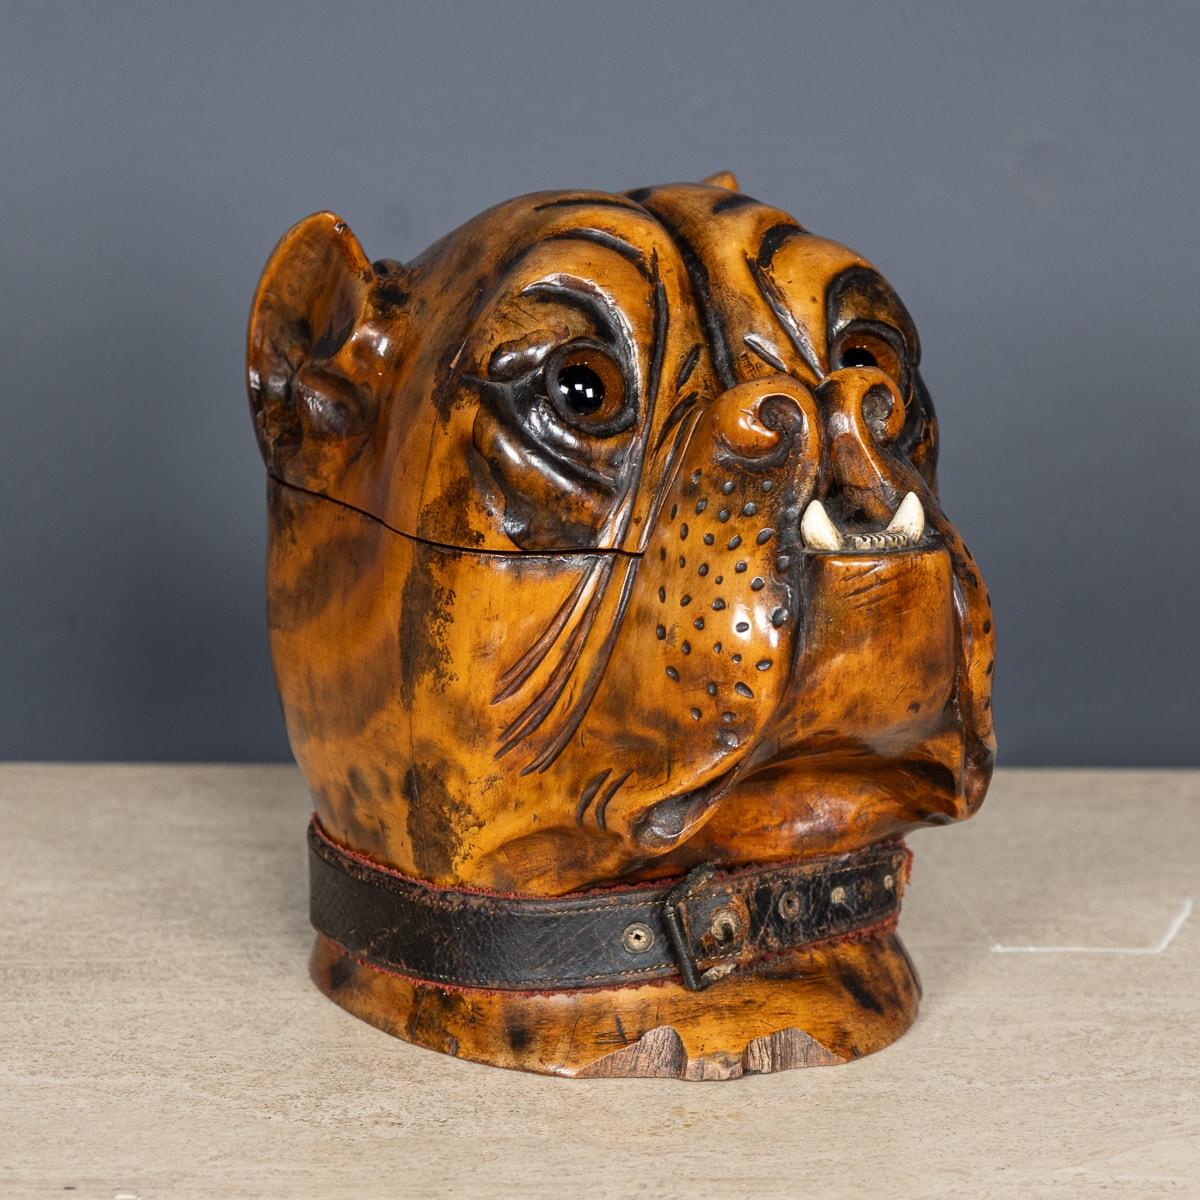 Antique 19th Century Victorian lignum vitae tobacco jar carved in the form of a bulldog head. The detail is of exceptional quality, featuring glass eyes, small pretruding white teeth from the bottom jaw and a black leather collar around the base. It